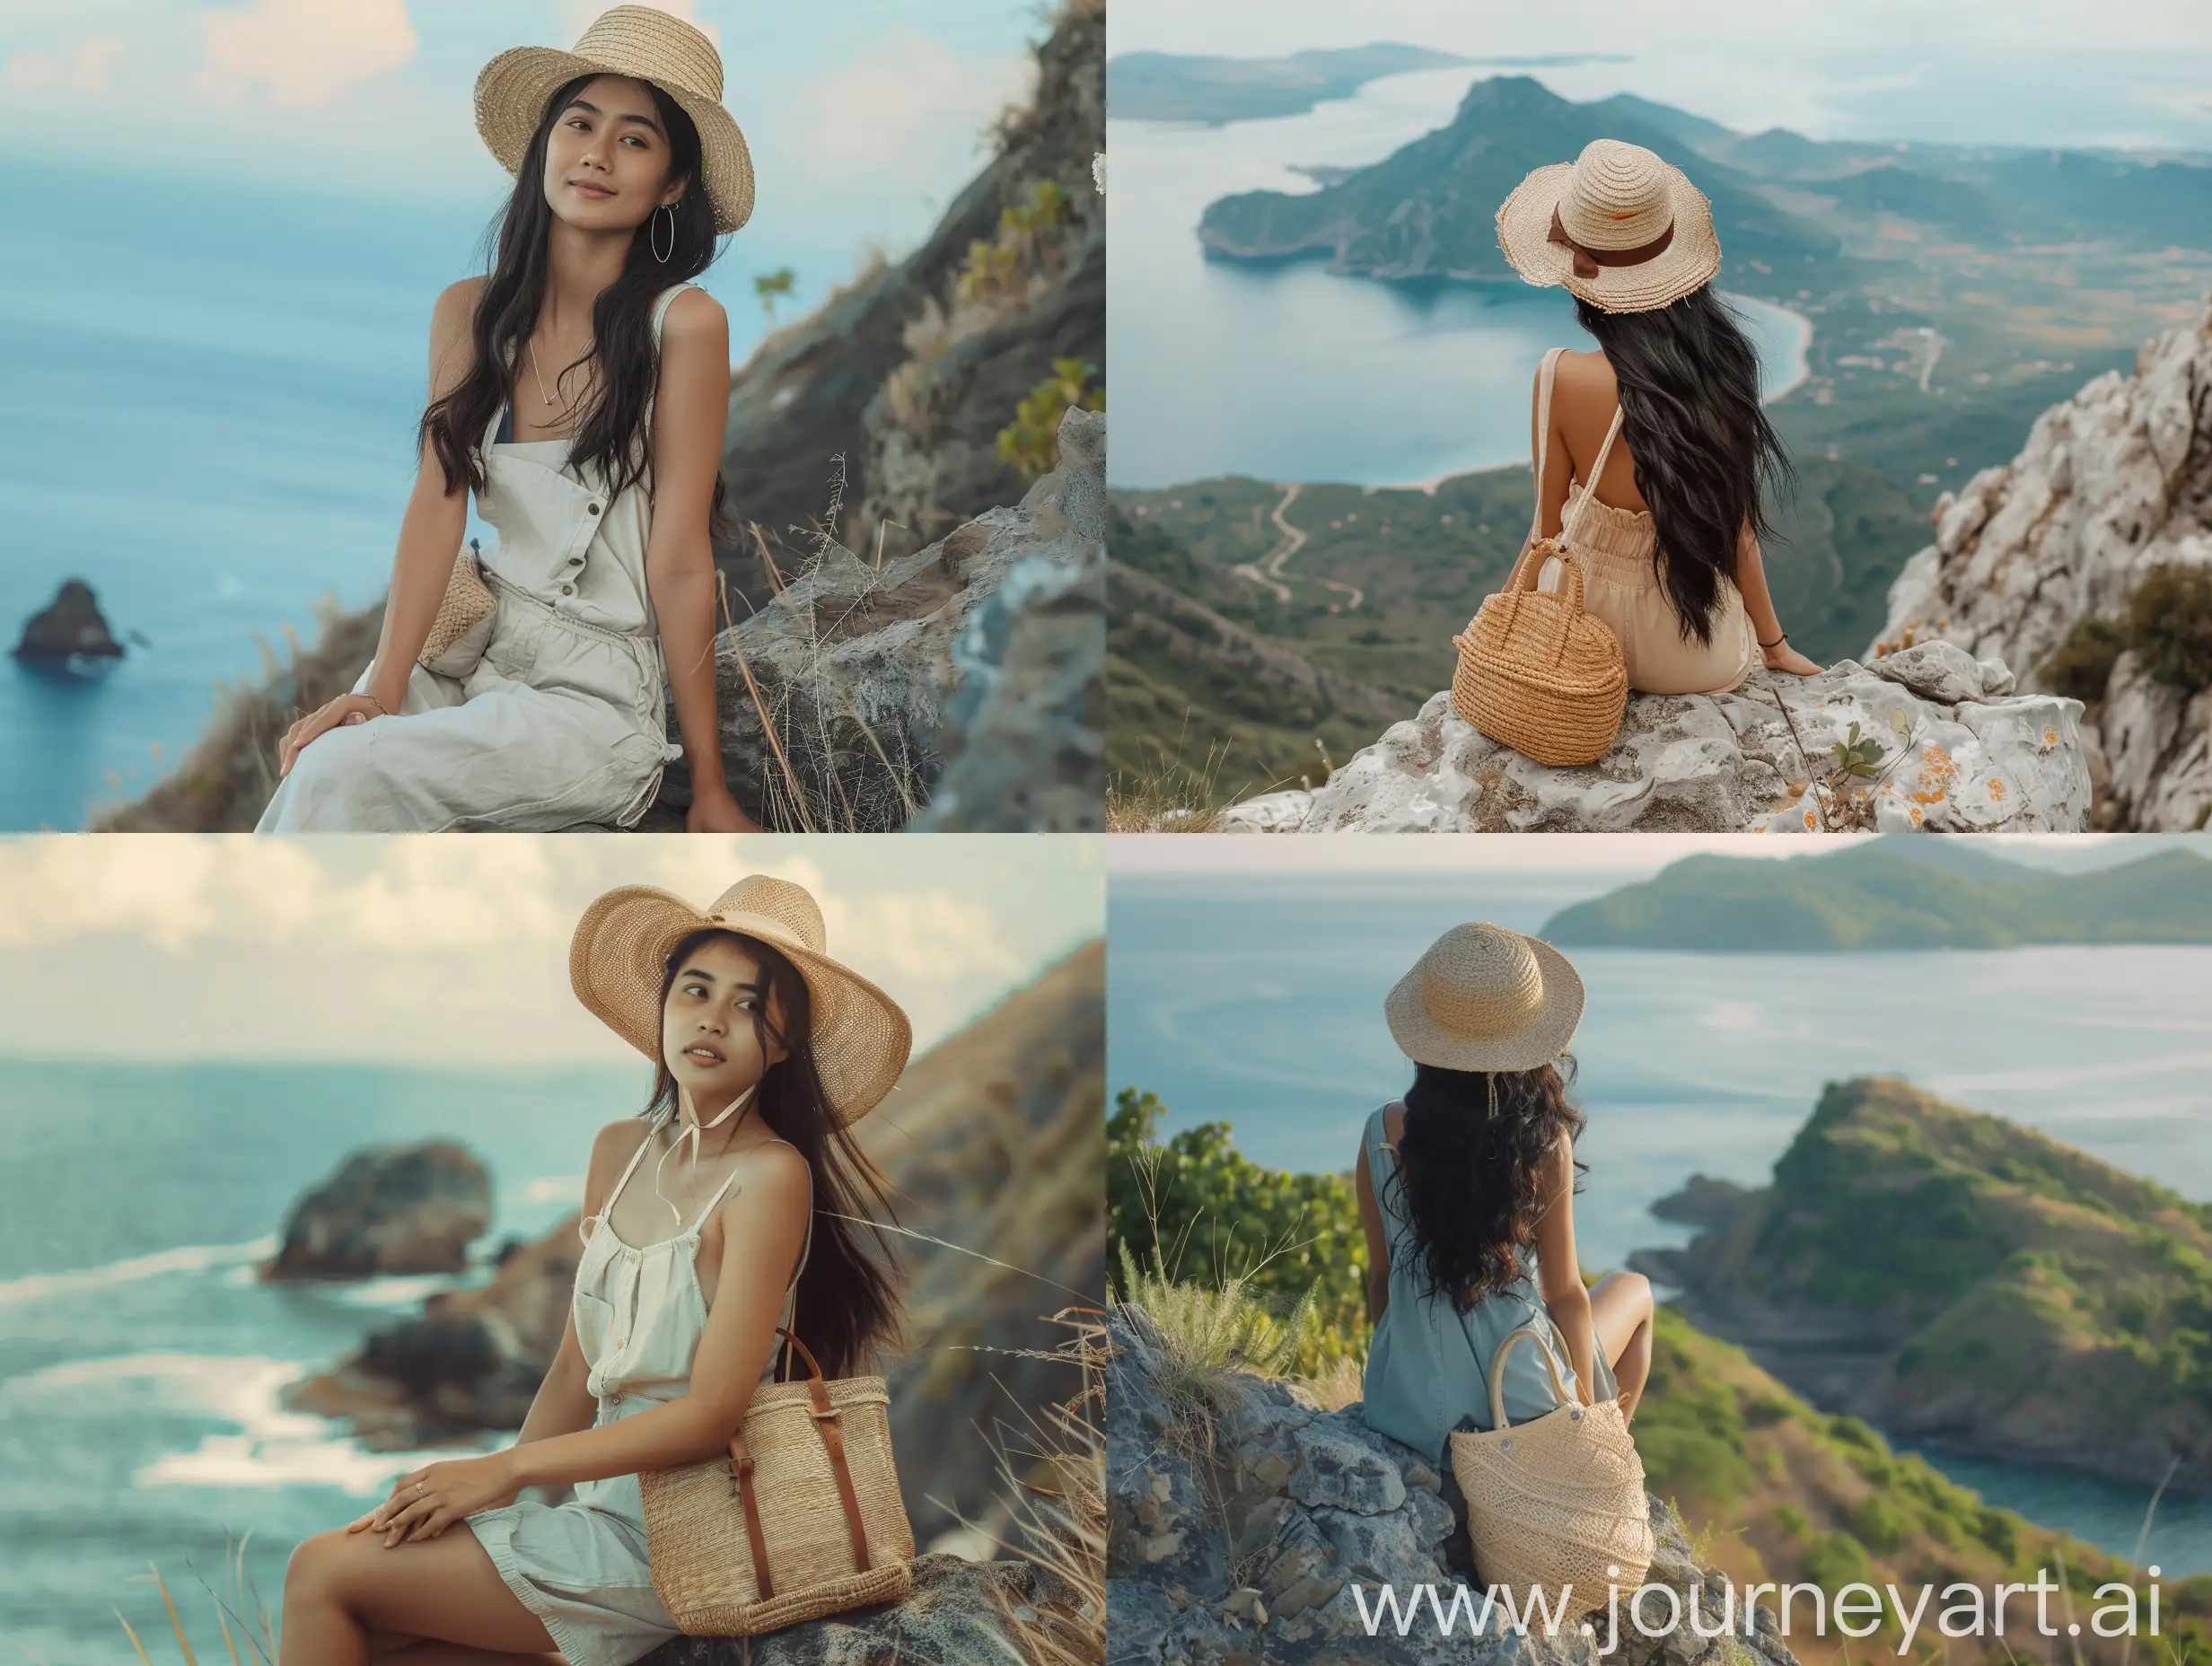 Indonesian-Woman-in-Cute-Overalls-and-Straw-Hat-Enjoying-Mountain-View